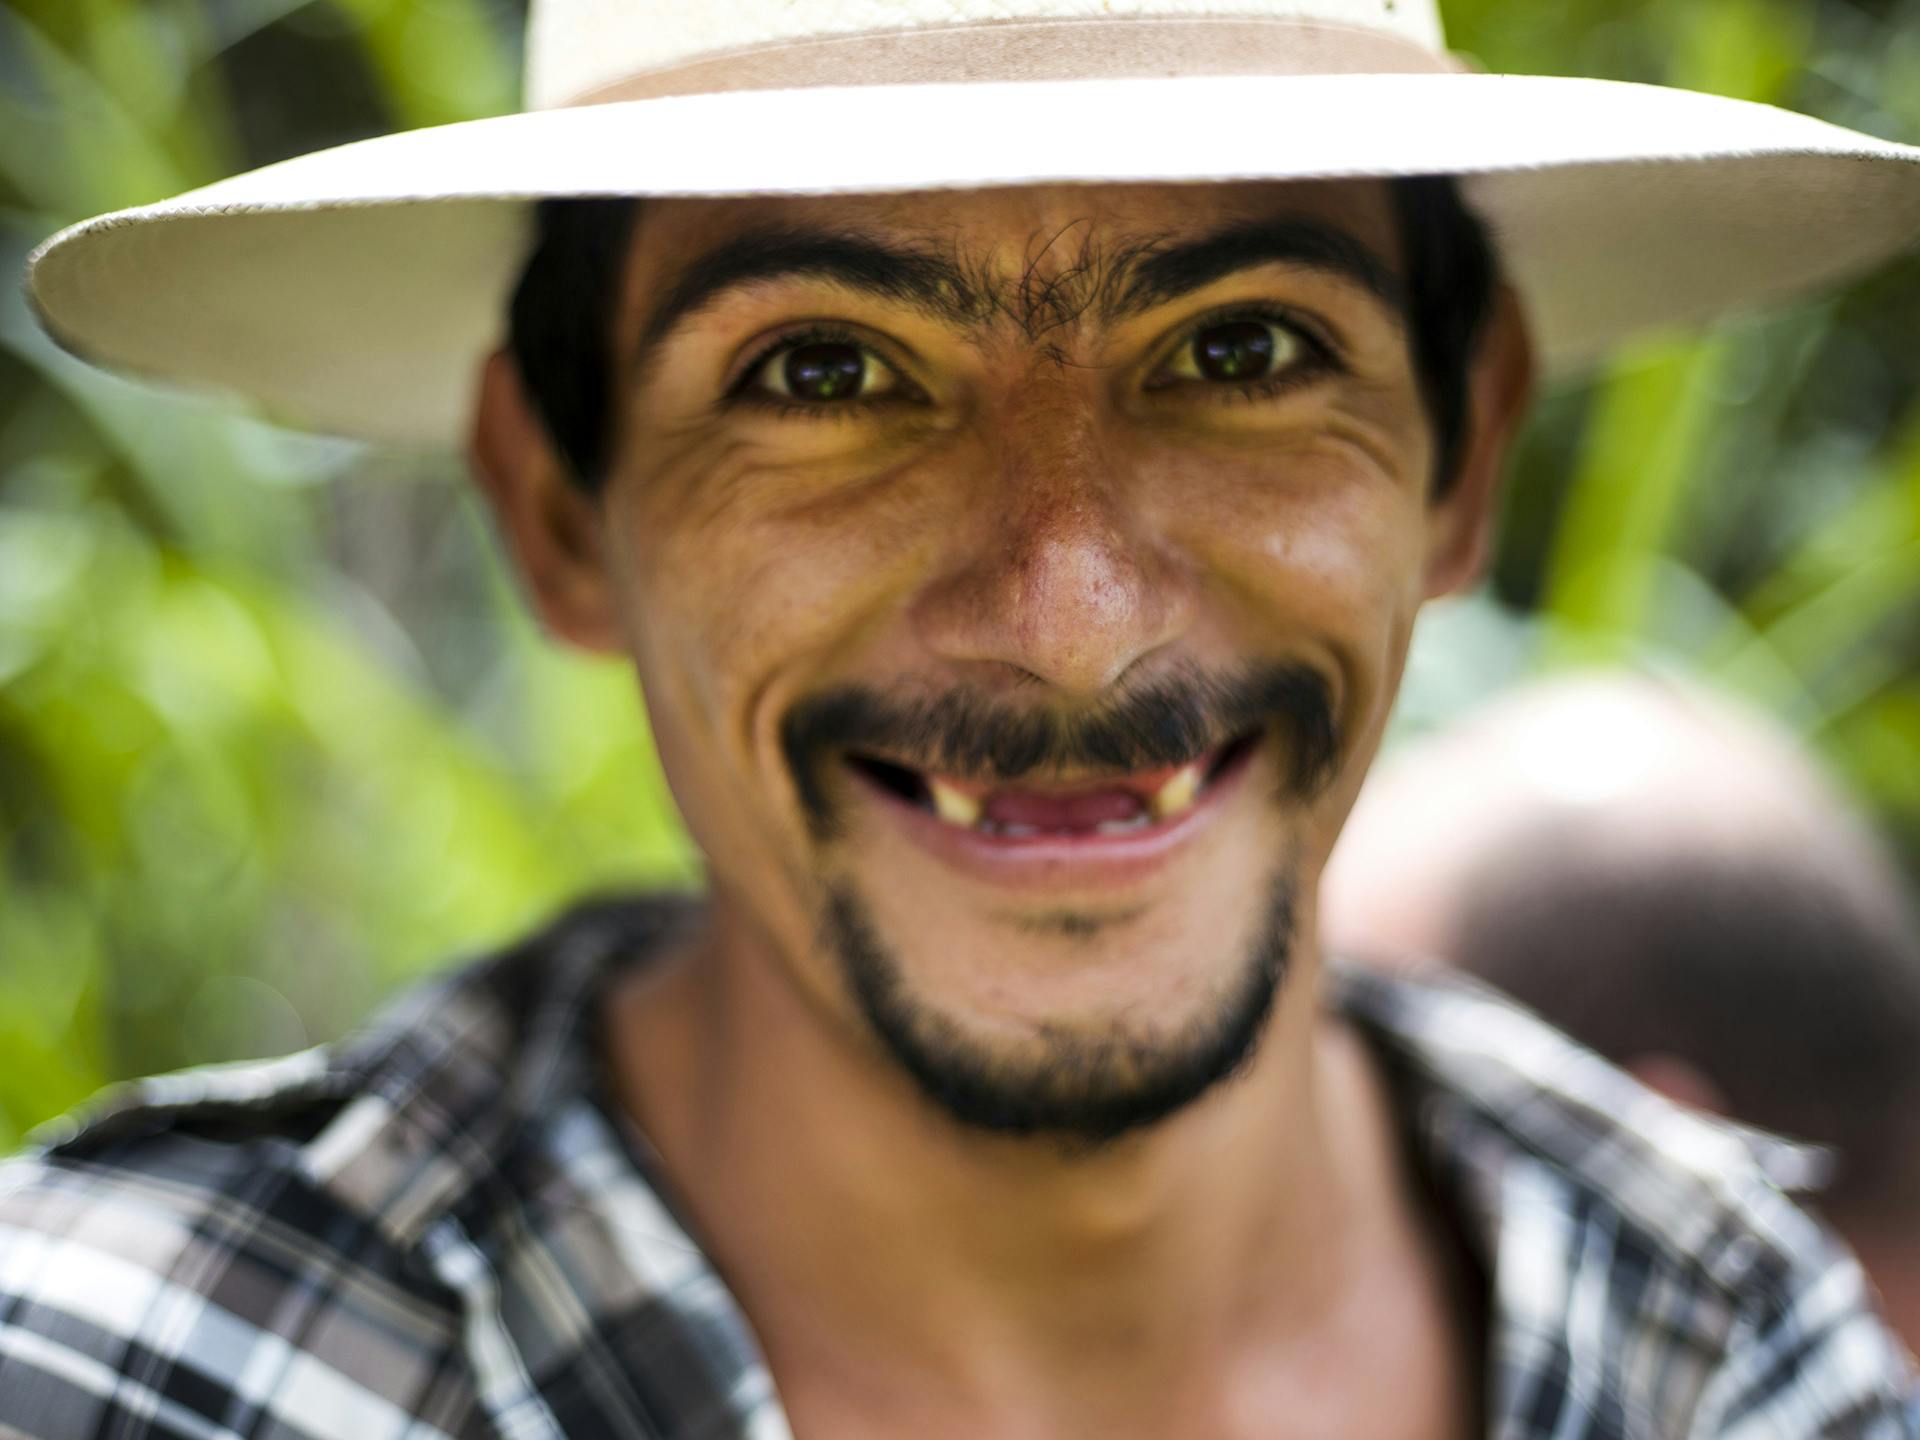 Smiling man with a hat